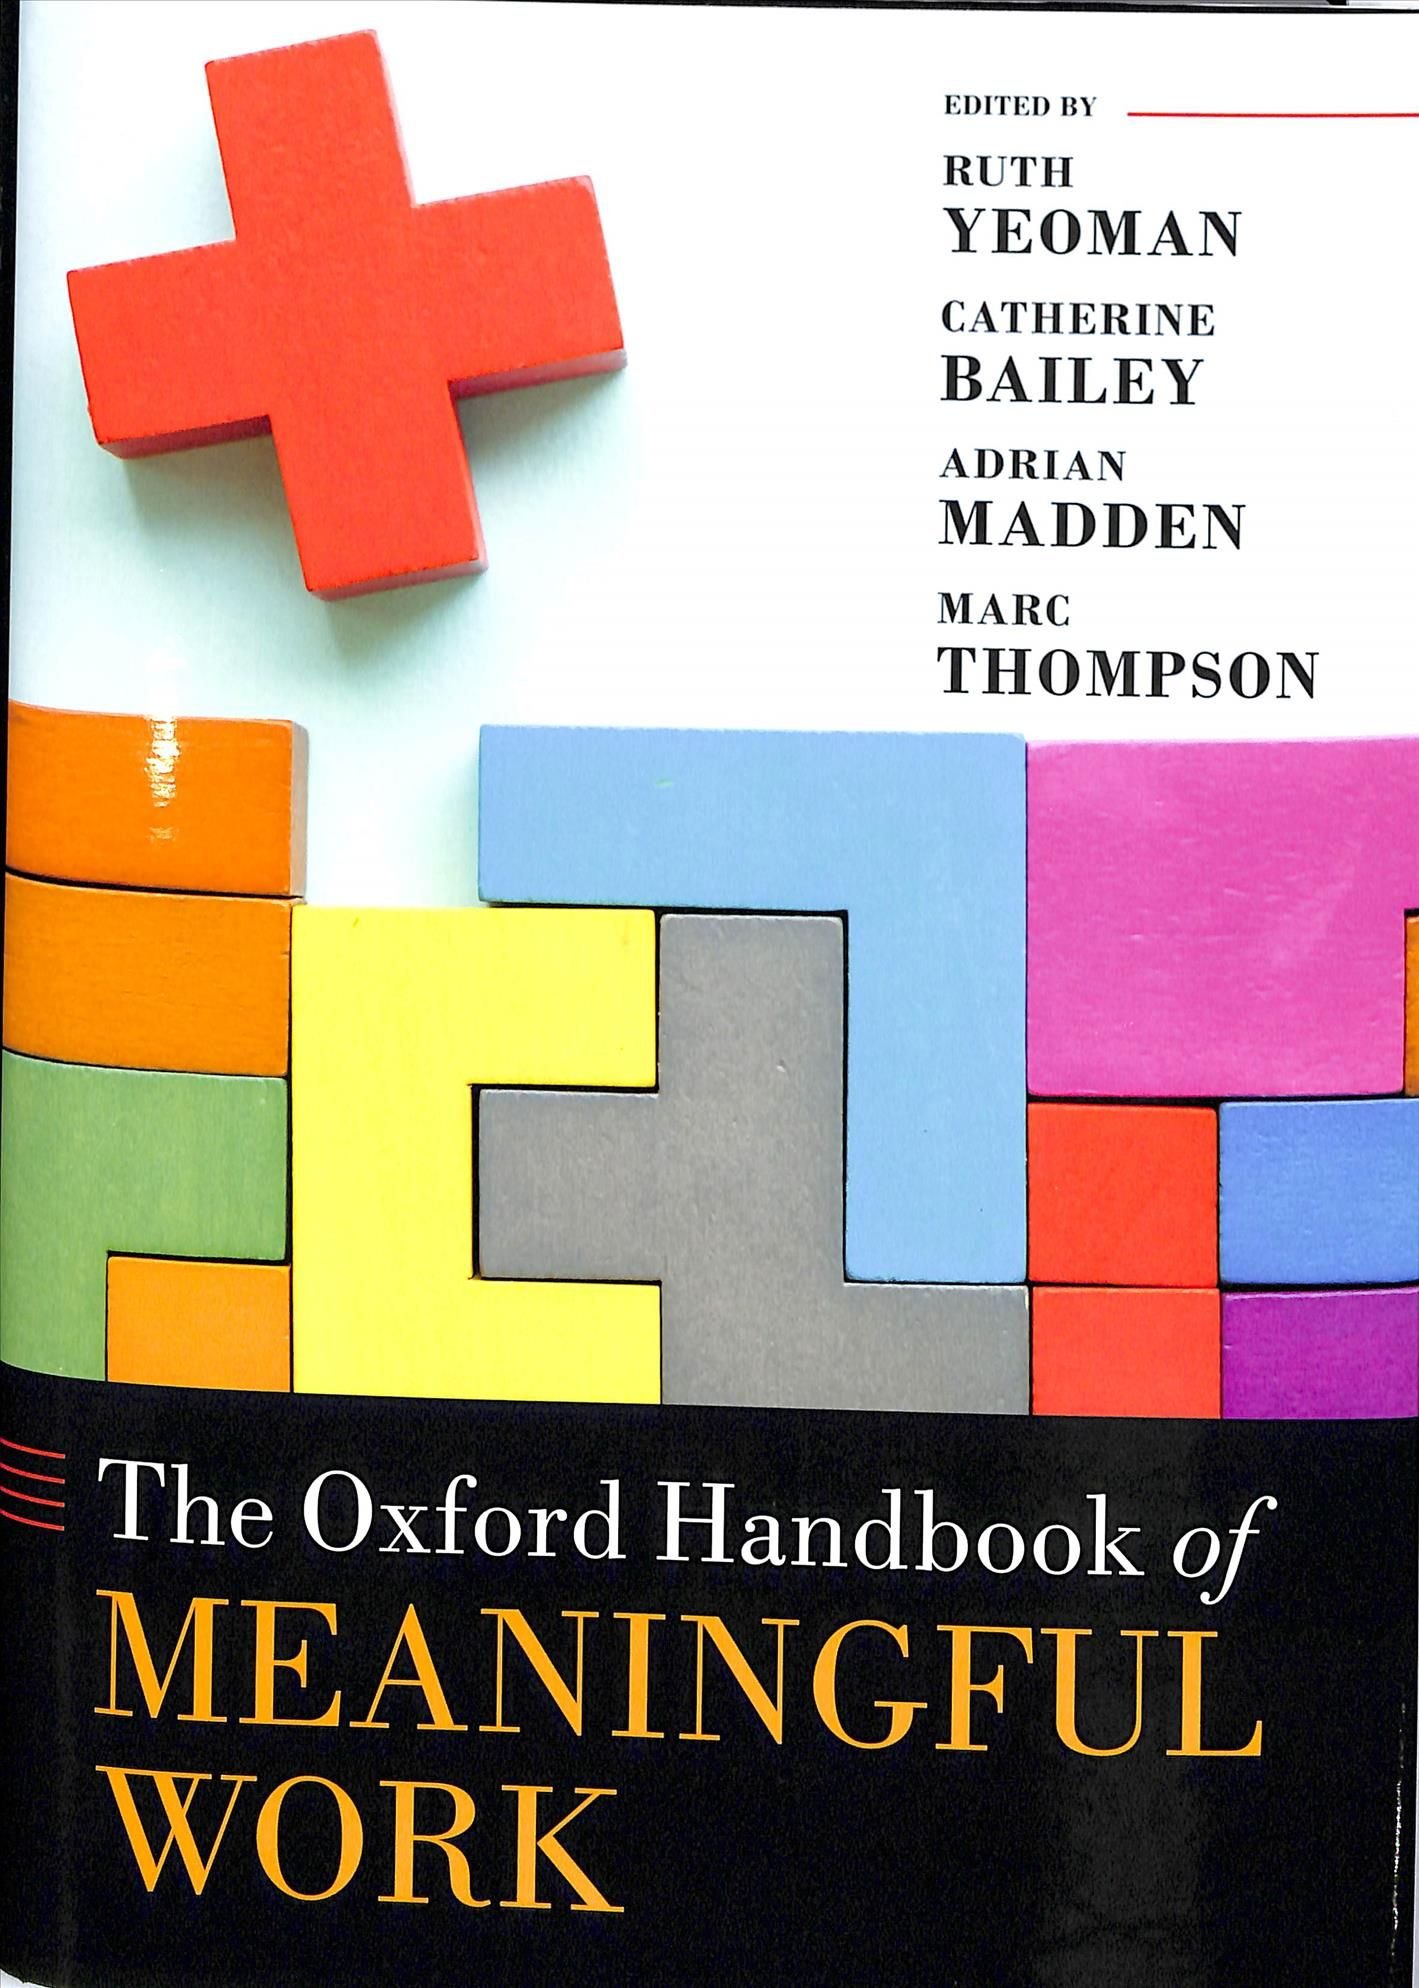 Handbook　Free　Work　of　With　Delivery　Meaningful　Yeoman　by　Ruth　Buy　Oxford